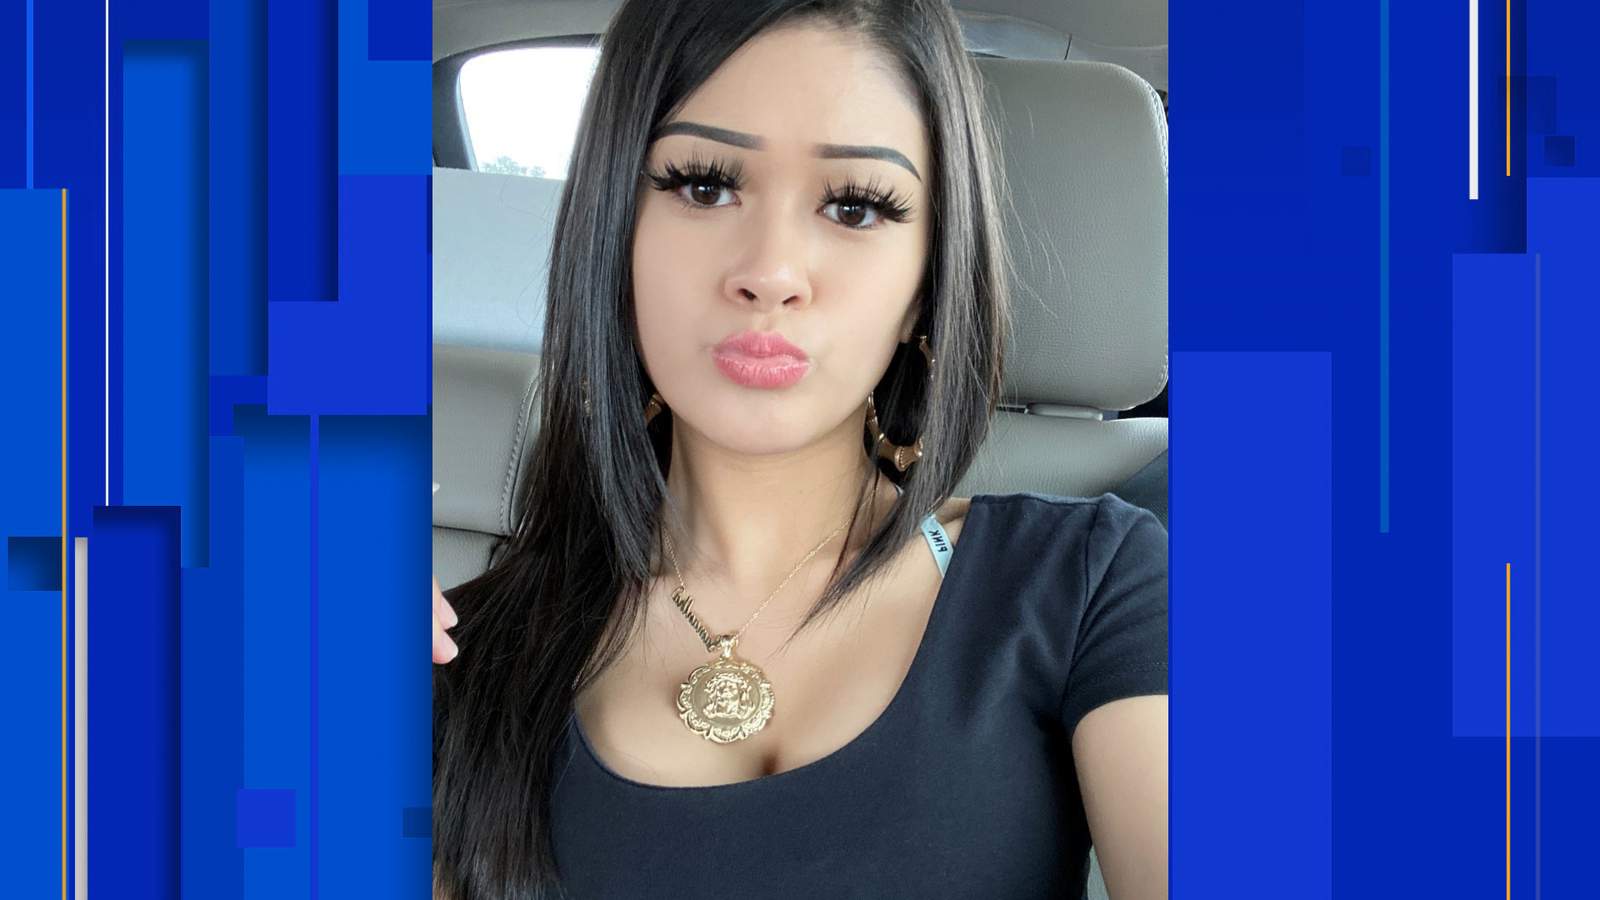 BCSO: Search underway for missing teen in Bexar County